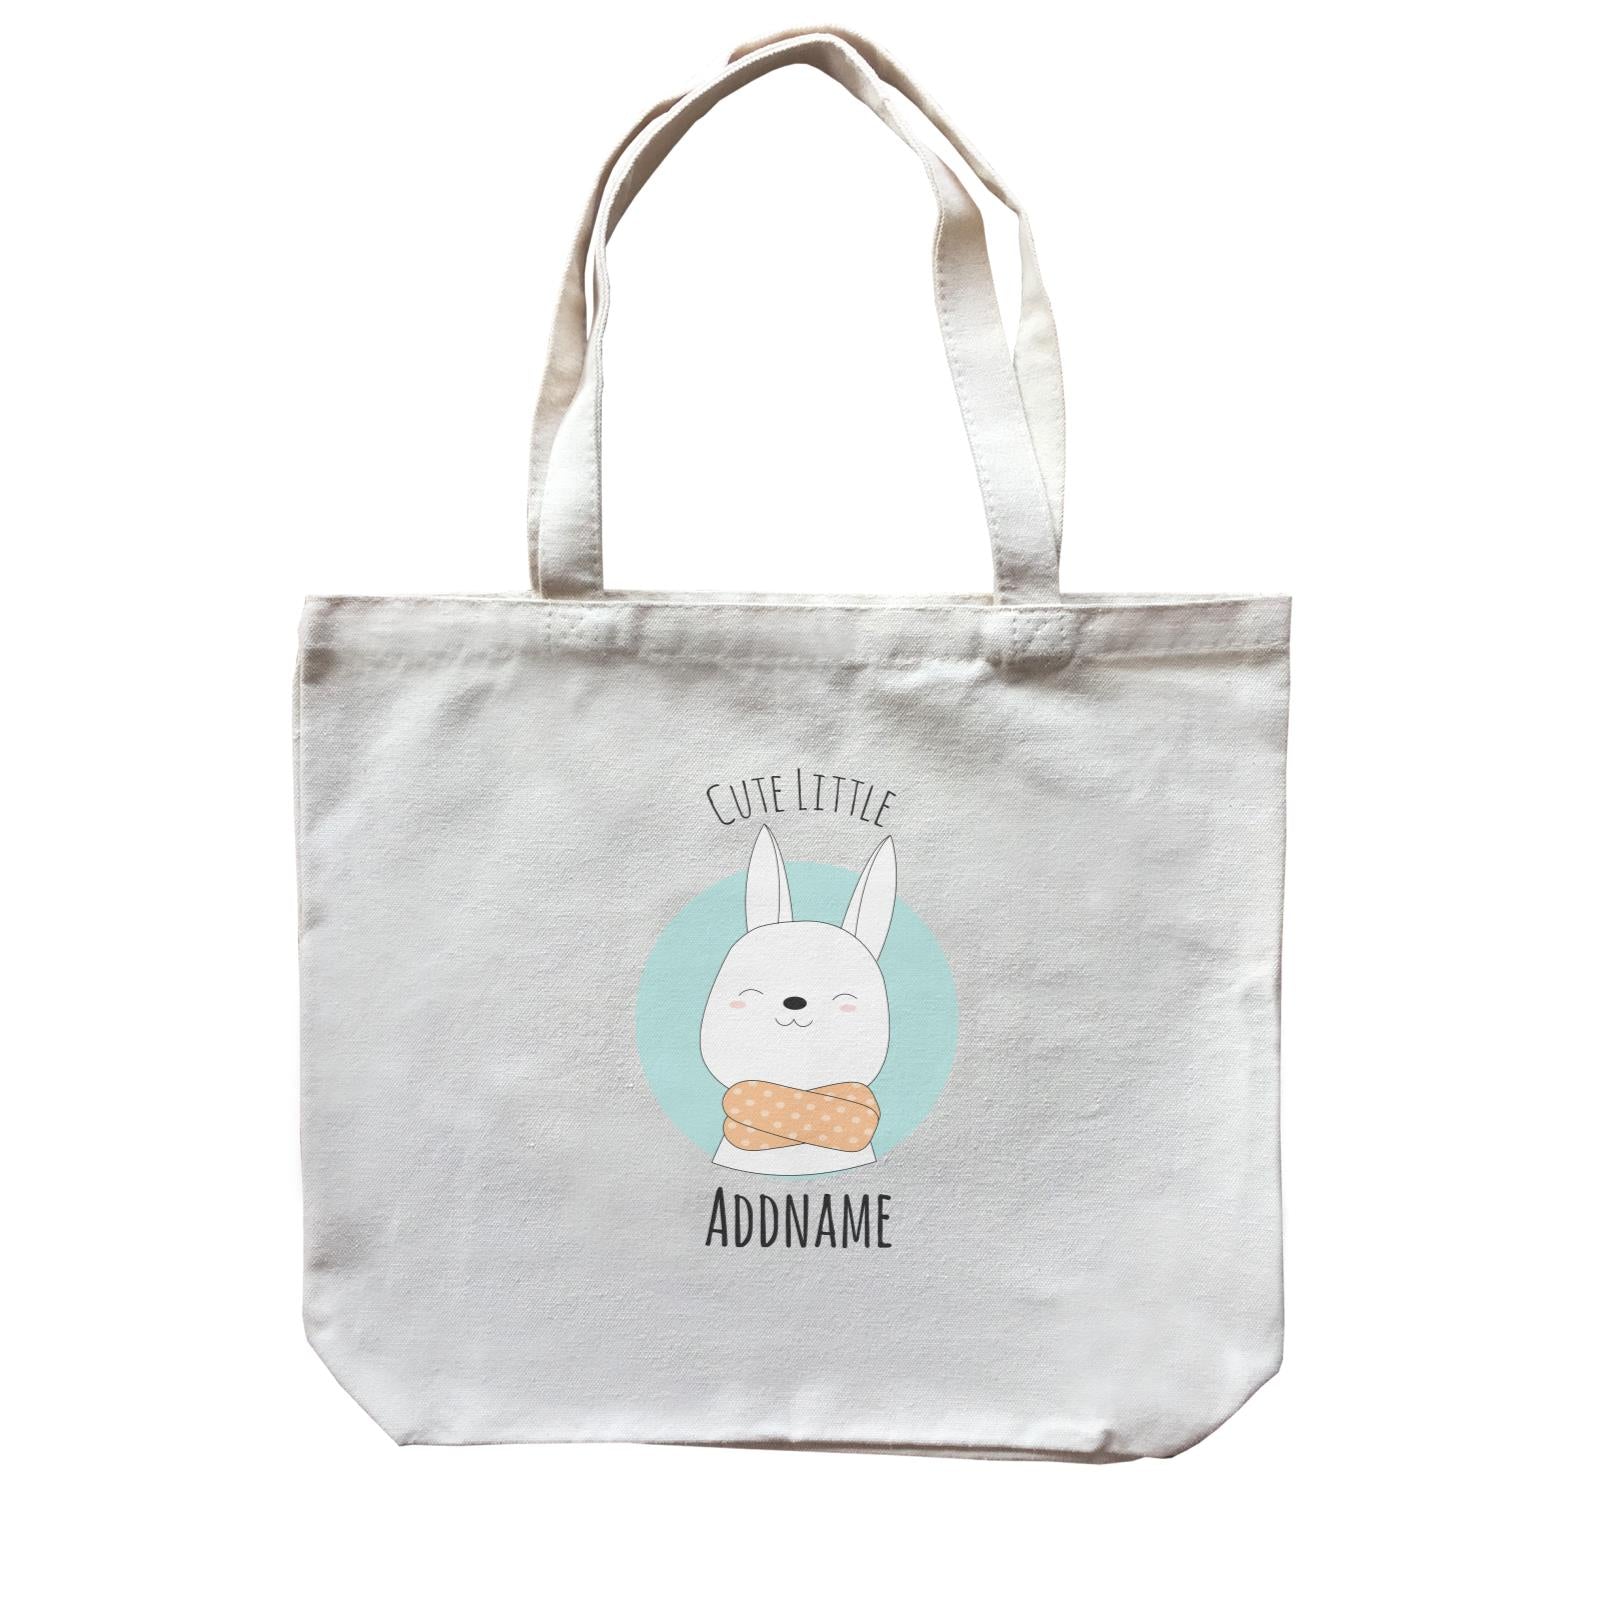 Sweet Animals Sketches Rabbit Cute Little Addname Canvas Bag